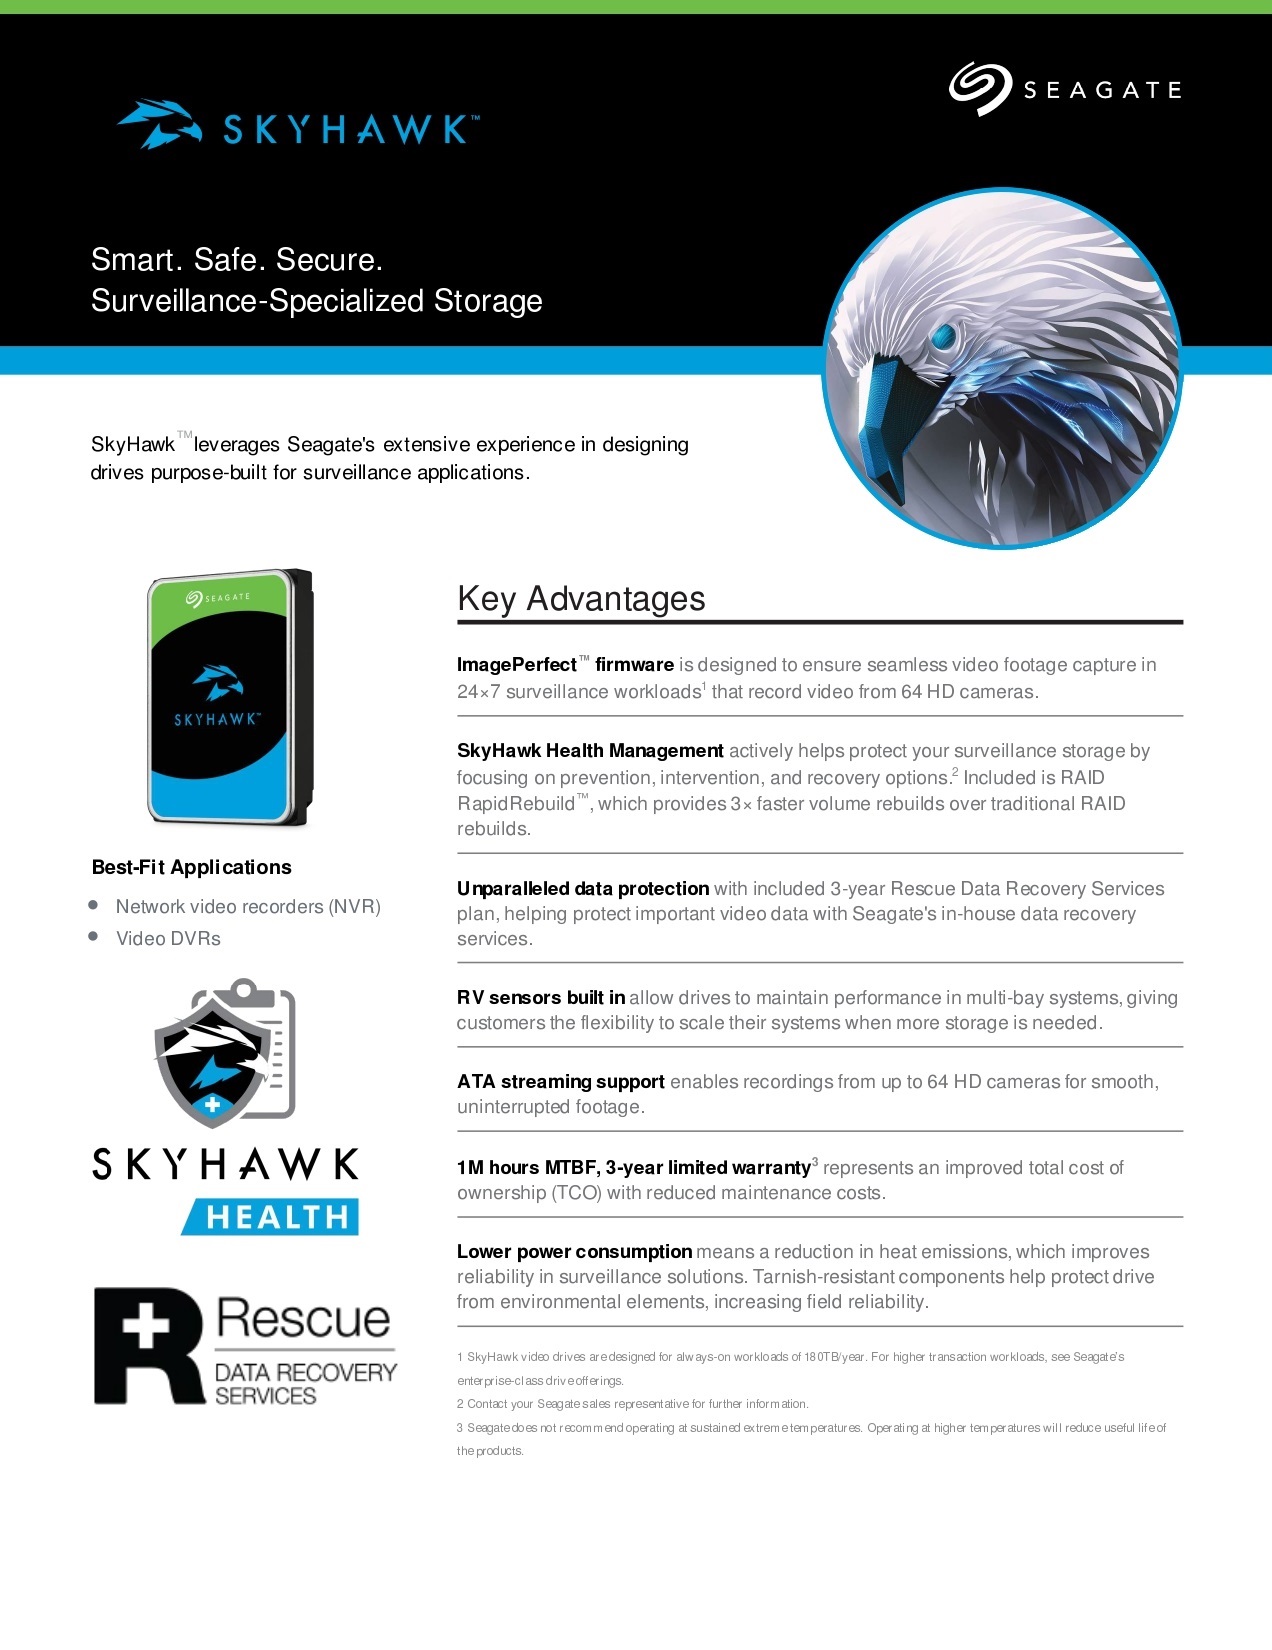 A large marketing image providing additional information about the product Seagate SkyHawk 3.5" Surveillance HDD - 2TB 256MB - Additional alt info not provided